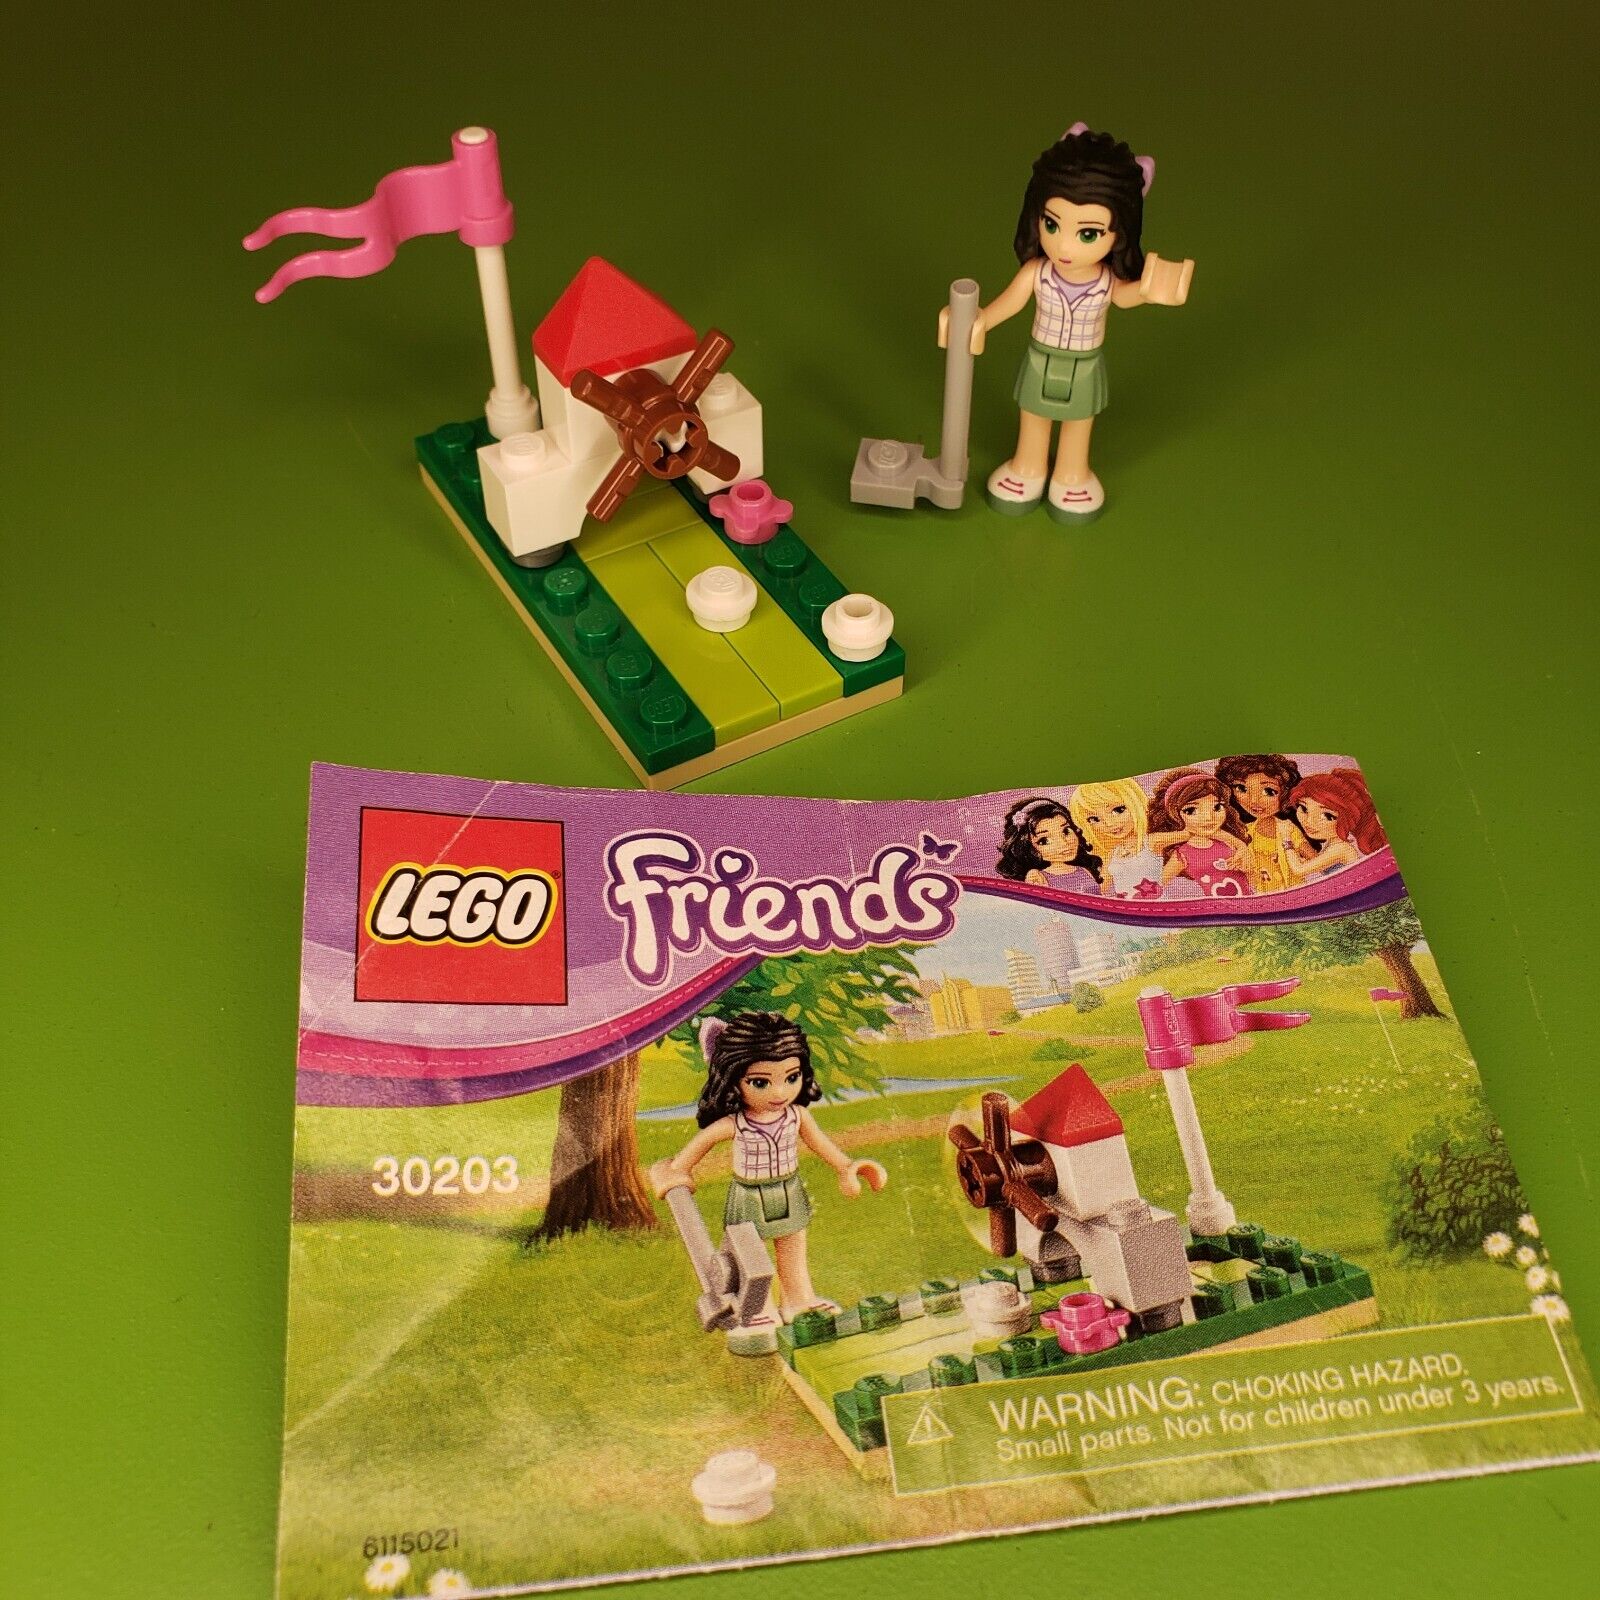 LEGO FRIENDS: Mini Golf (30203) Complete with Instructions